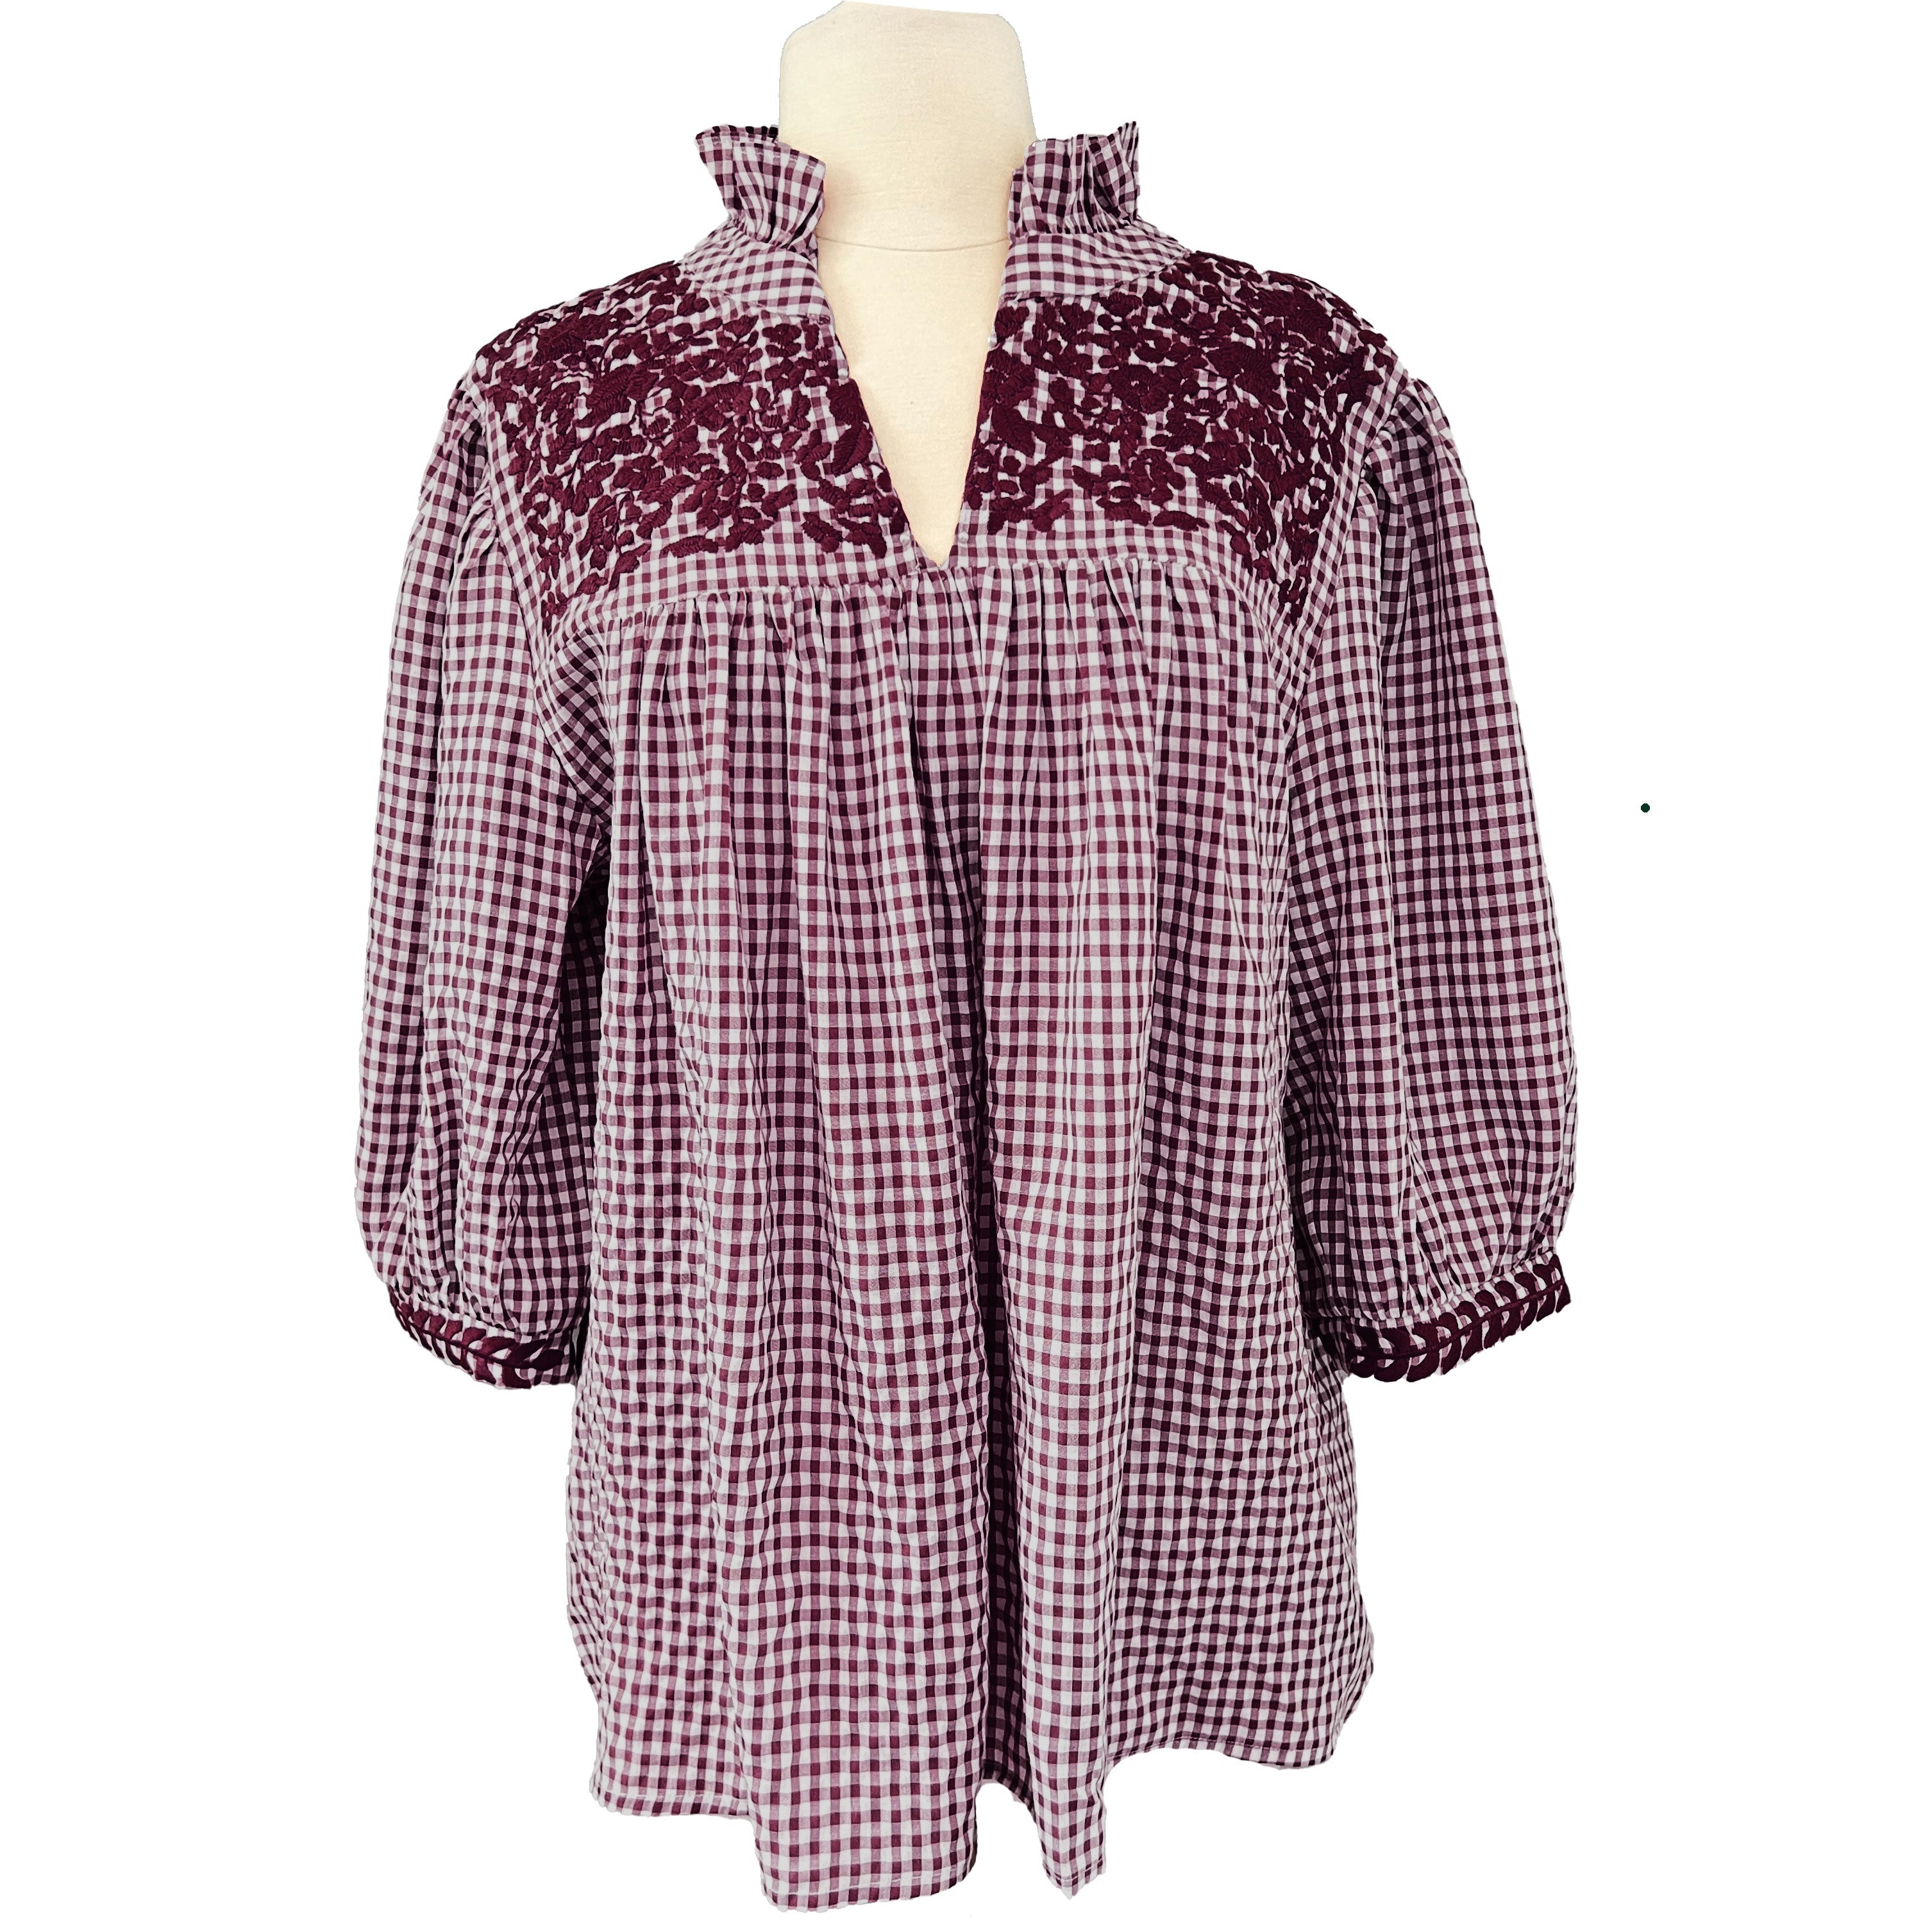 Aggie Gingham Tailgater Blouse (XL only)